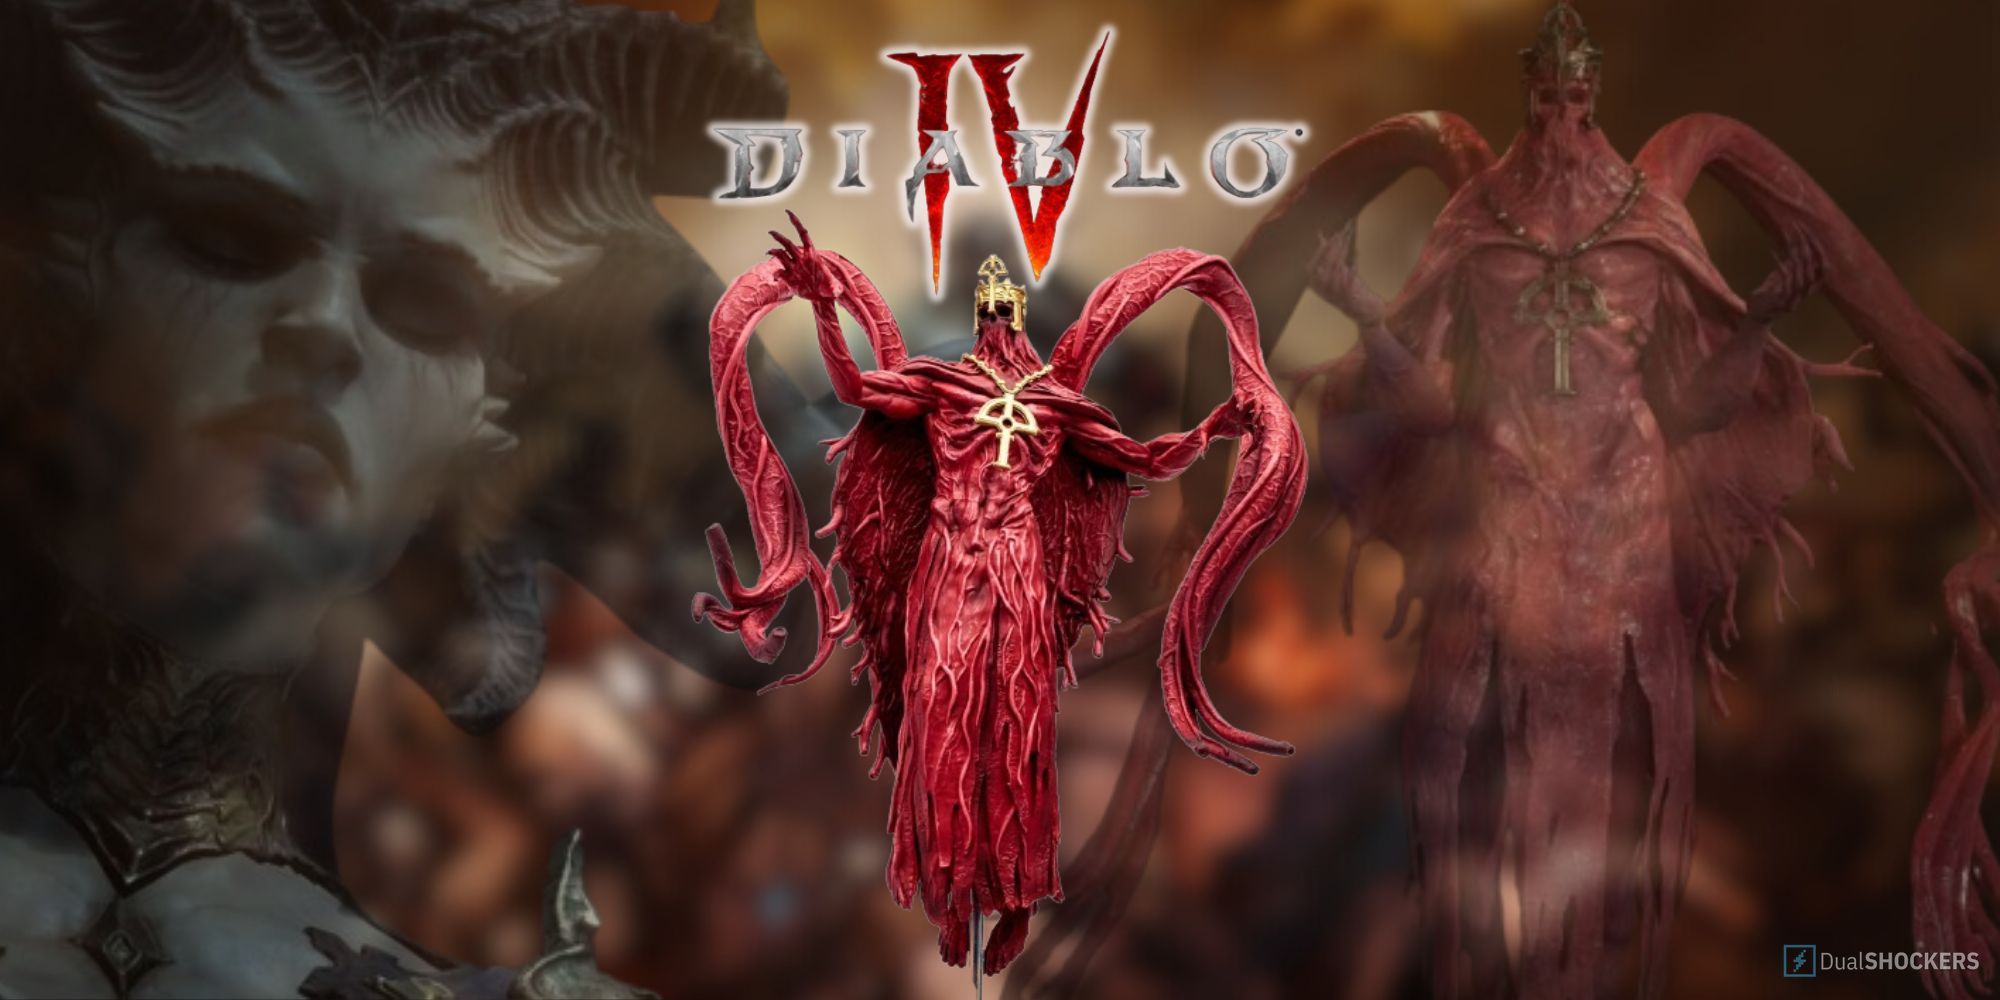 Product shot of the Blood Bishop figure with the villain and Lilith in the background with the Diablo 4 logo.